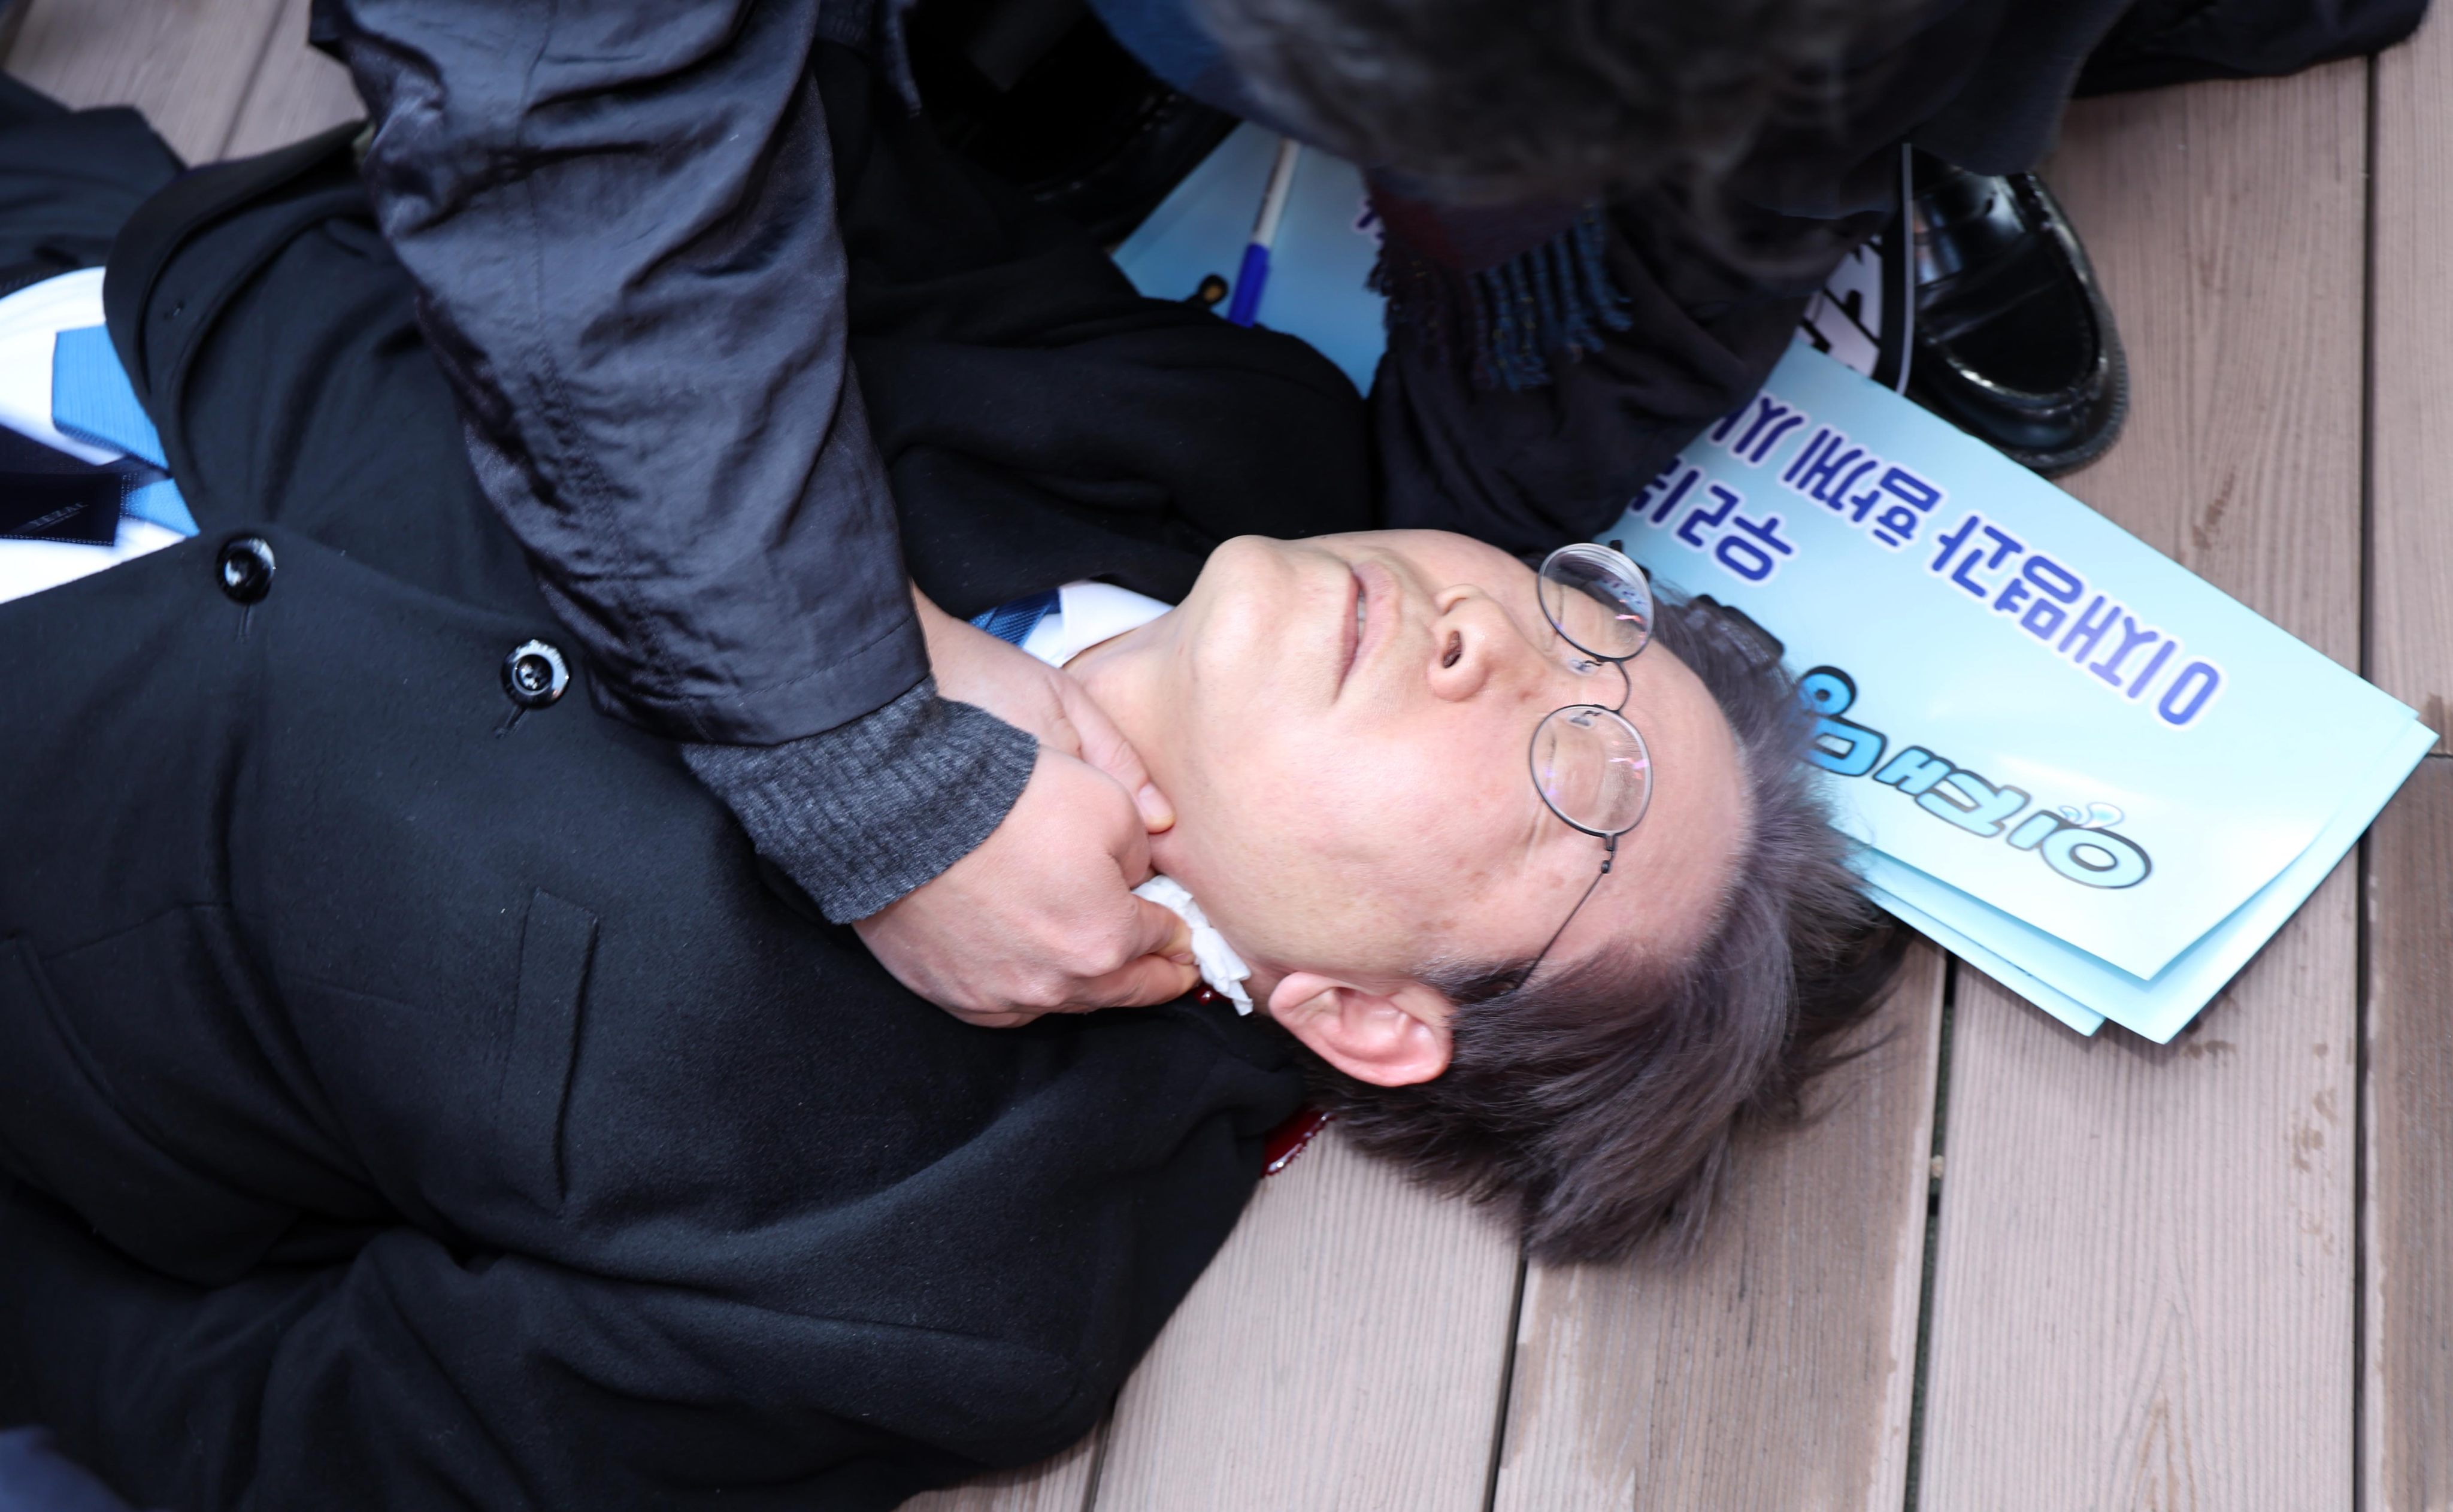 Lee Jae-myung, chief of South Korea’s main opposition Democratic Party, lies on the ground after being stabbed in the neck on January 2. Photo: Newsis via Xinhua